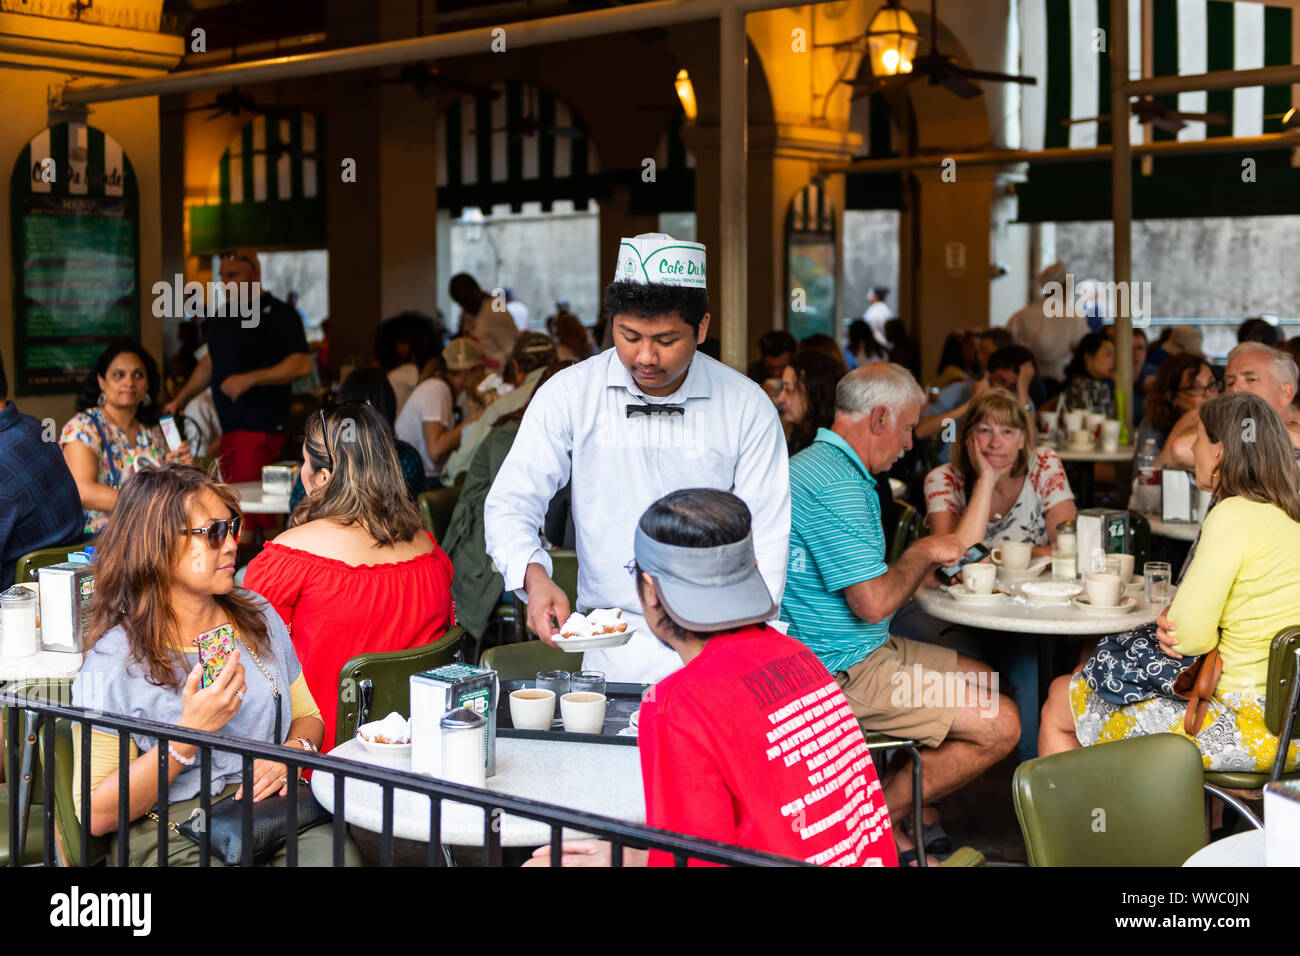 New Orleans, USA - April 22, 2018: People in famous Cafe Du Monde restaurant eating beignet powdered sugar donuts, drinking chicory coffee served by w Stock Photo